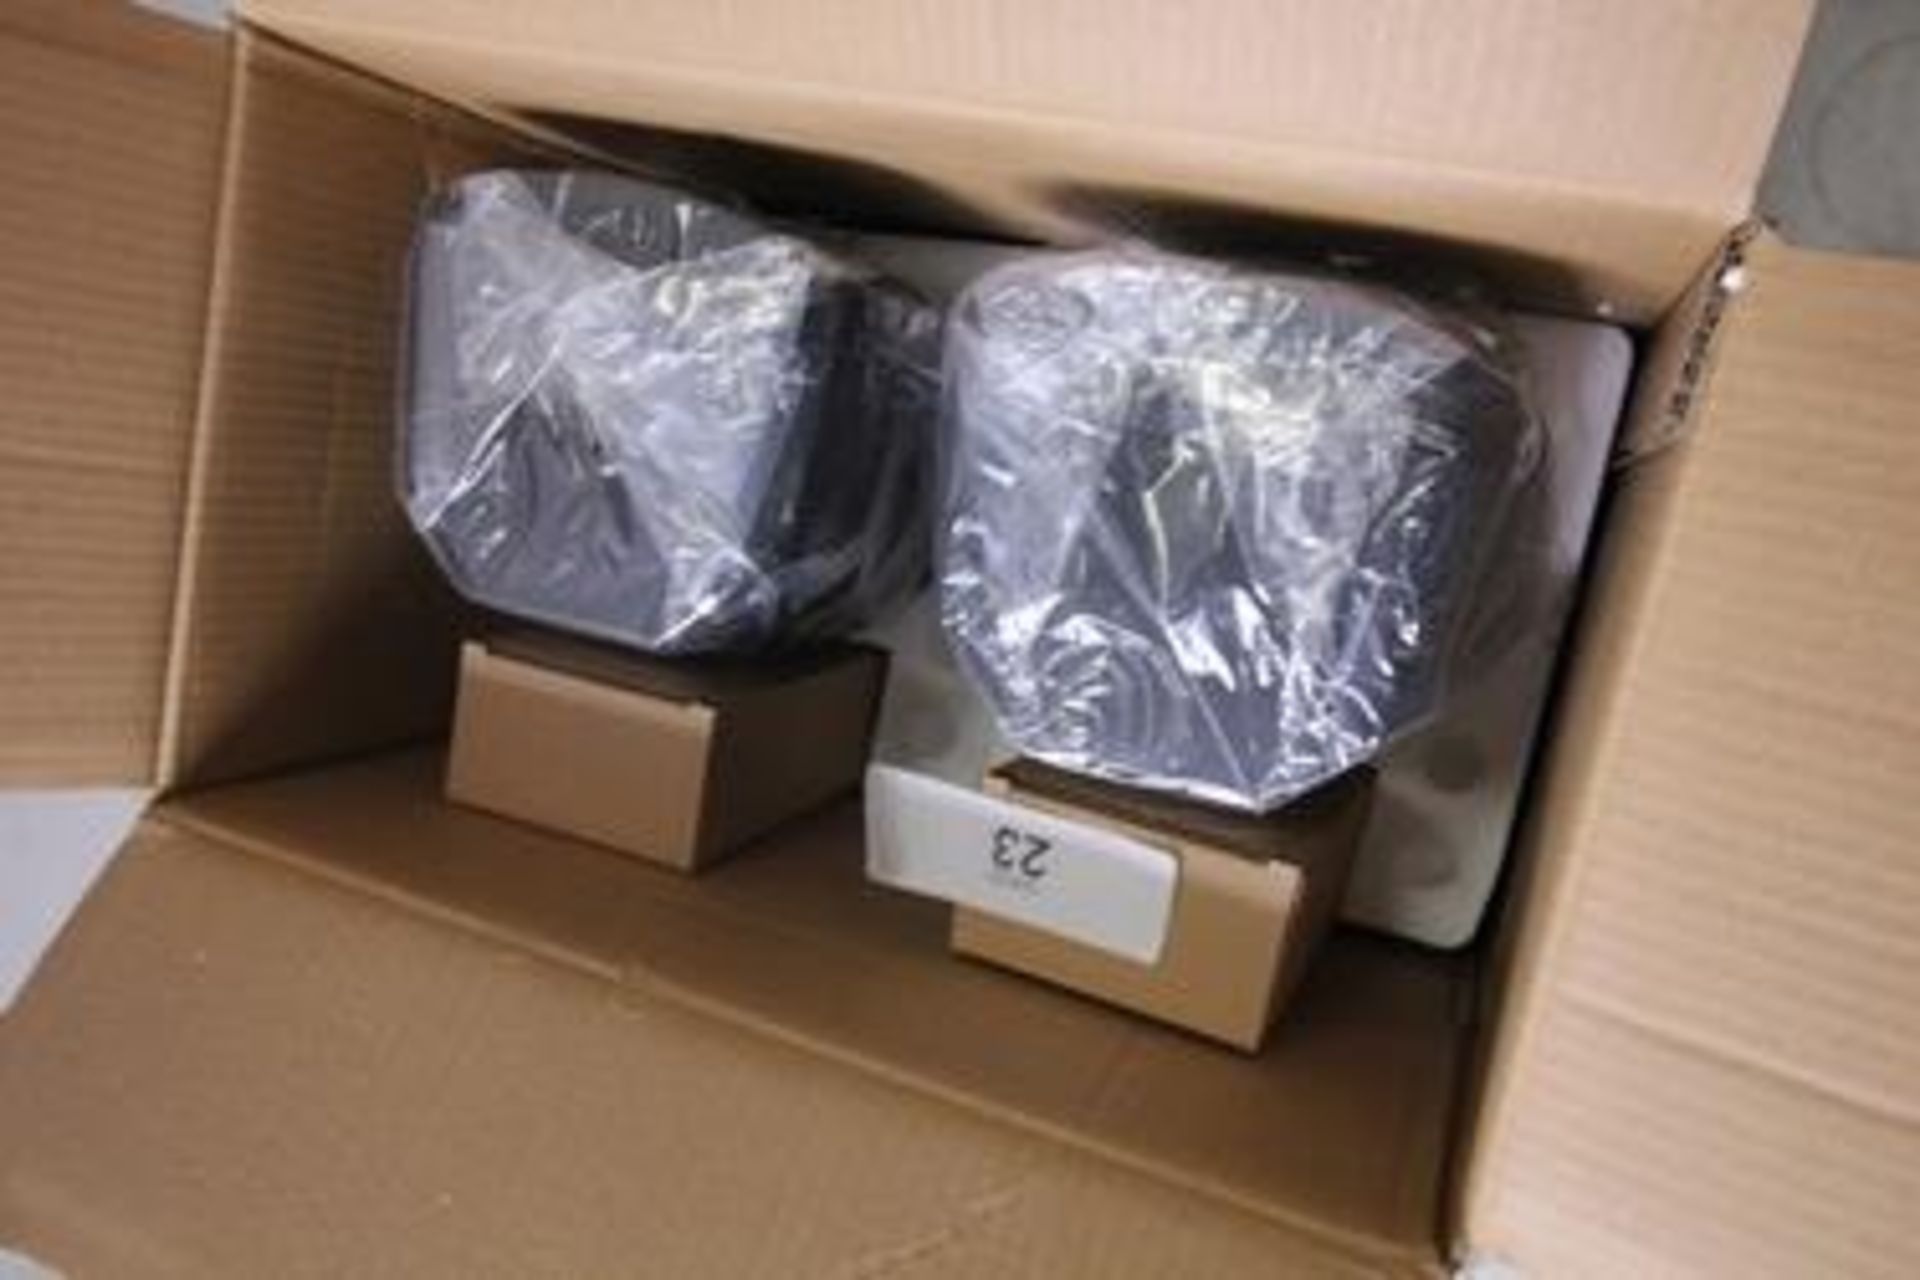 1 x pair of RCF MR 40T 100V Line speakers - New in box (ES1) - Image 2 of 3